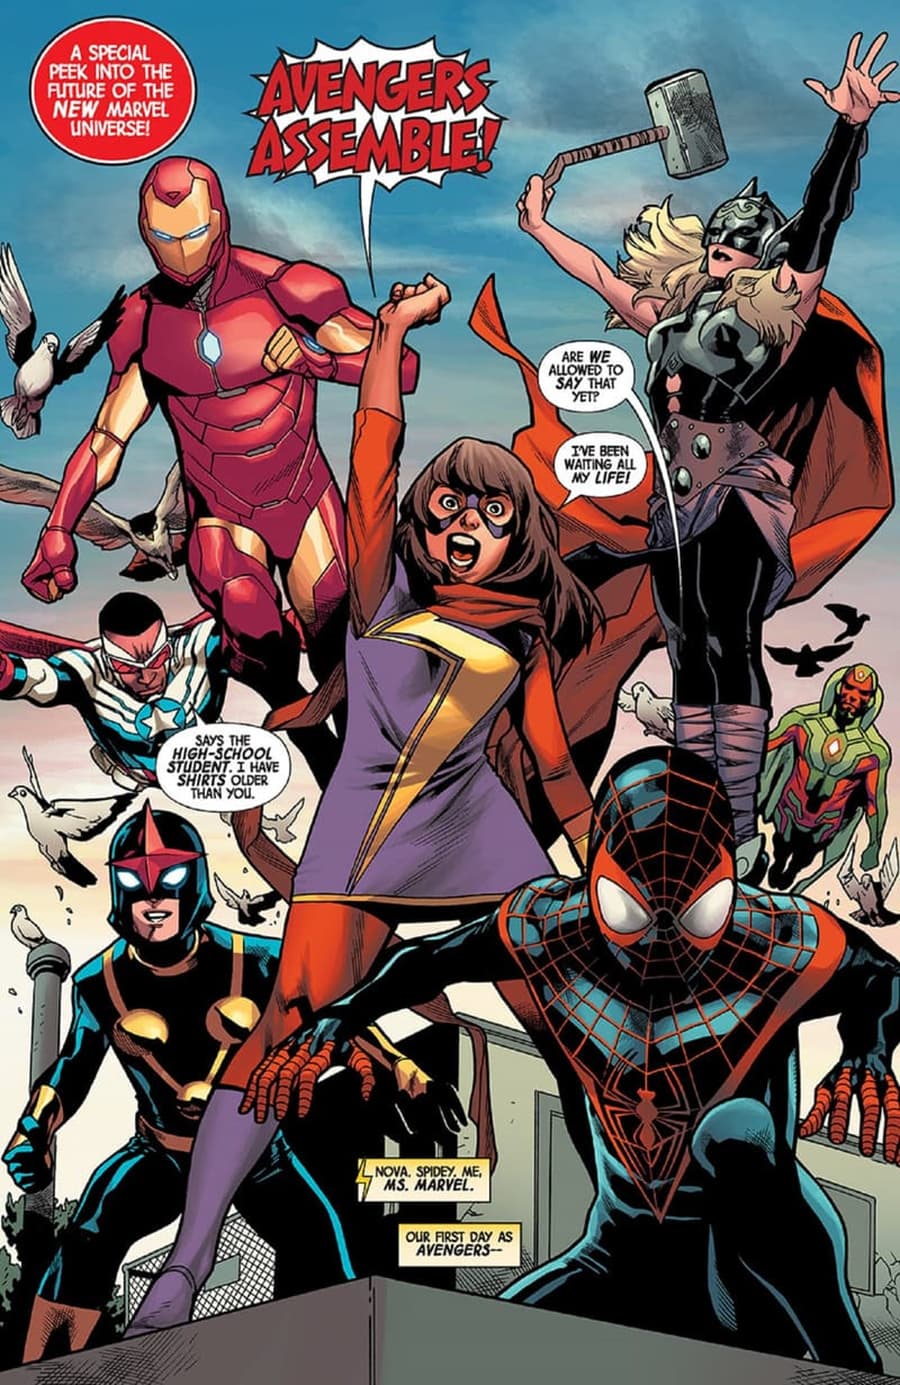 FREE COMIC BOOK DAY (ALL-NEW, ALL-DIFFERENT AVENGERS) (2015) #1 page by Mark Waid and Mahmud Asrar